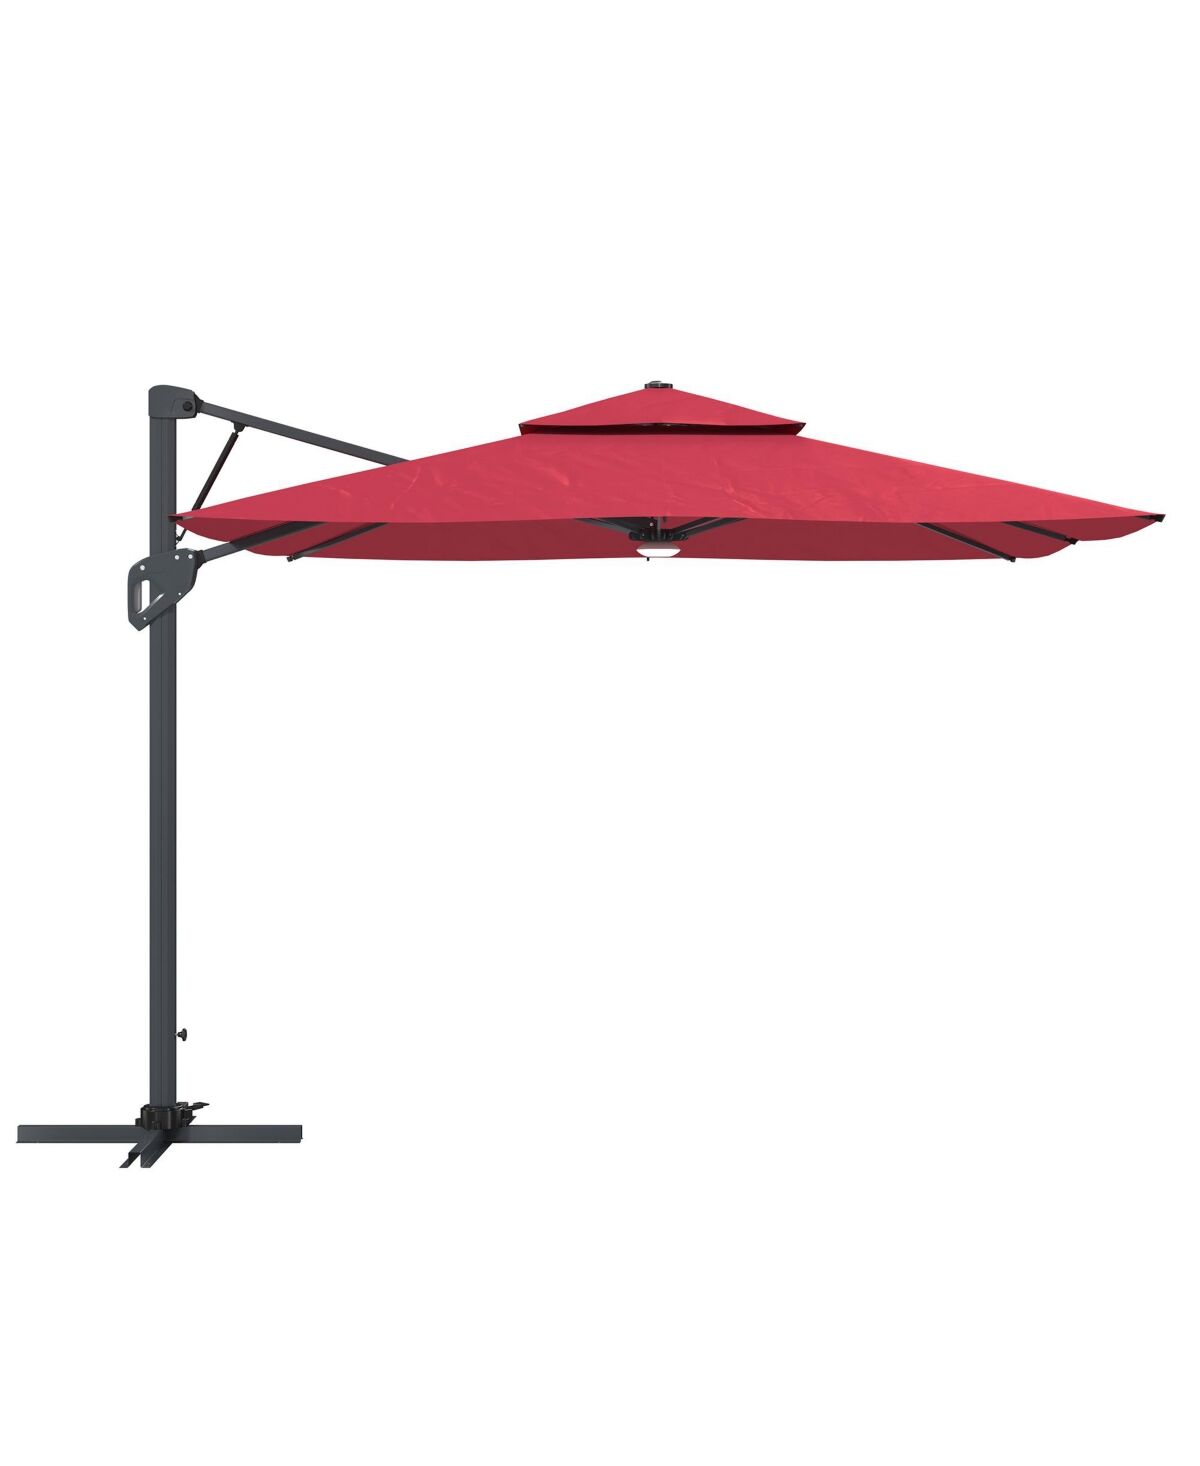 Mondawe 10ft Square Solar Led Offset Cantilever Outdoor Patio Umbrella with Built-in Bluetooth Speaker - Red